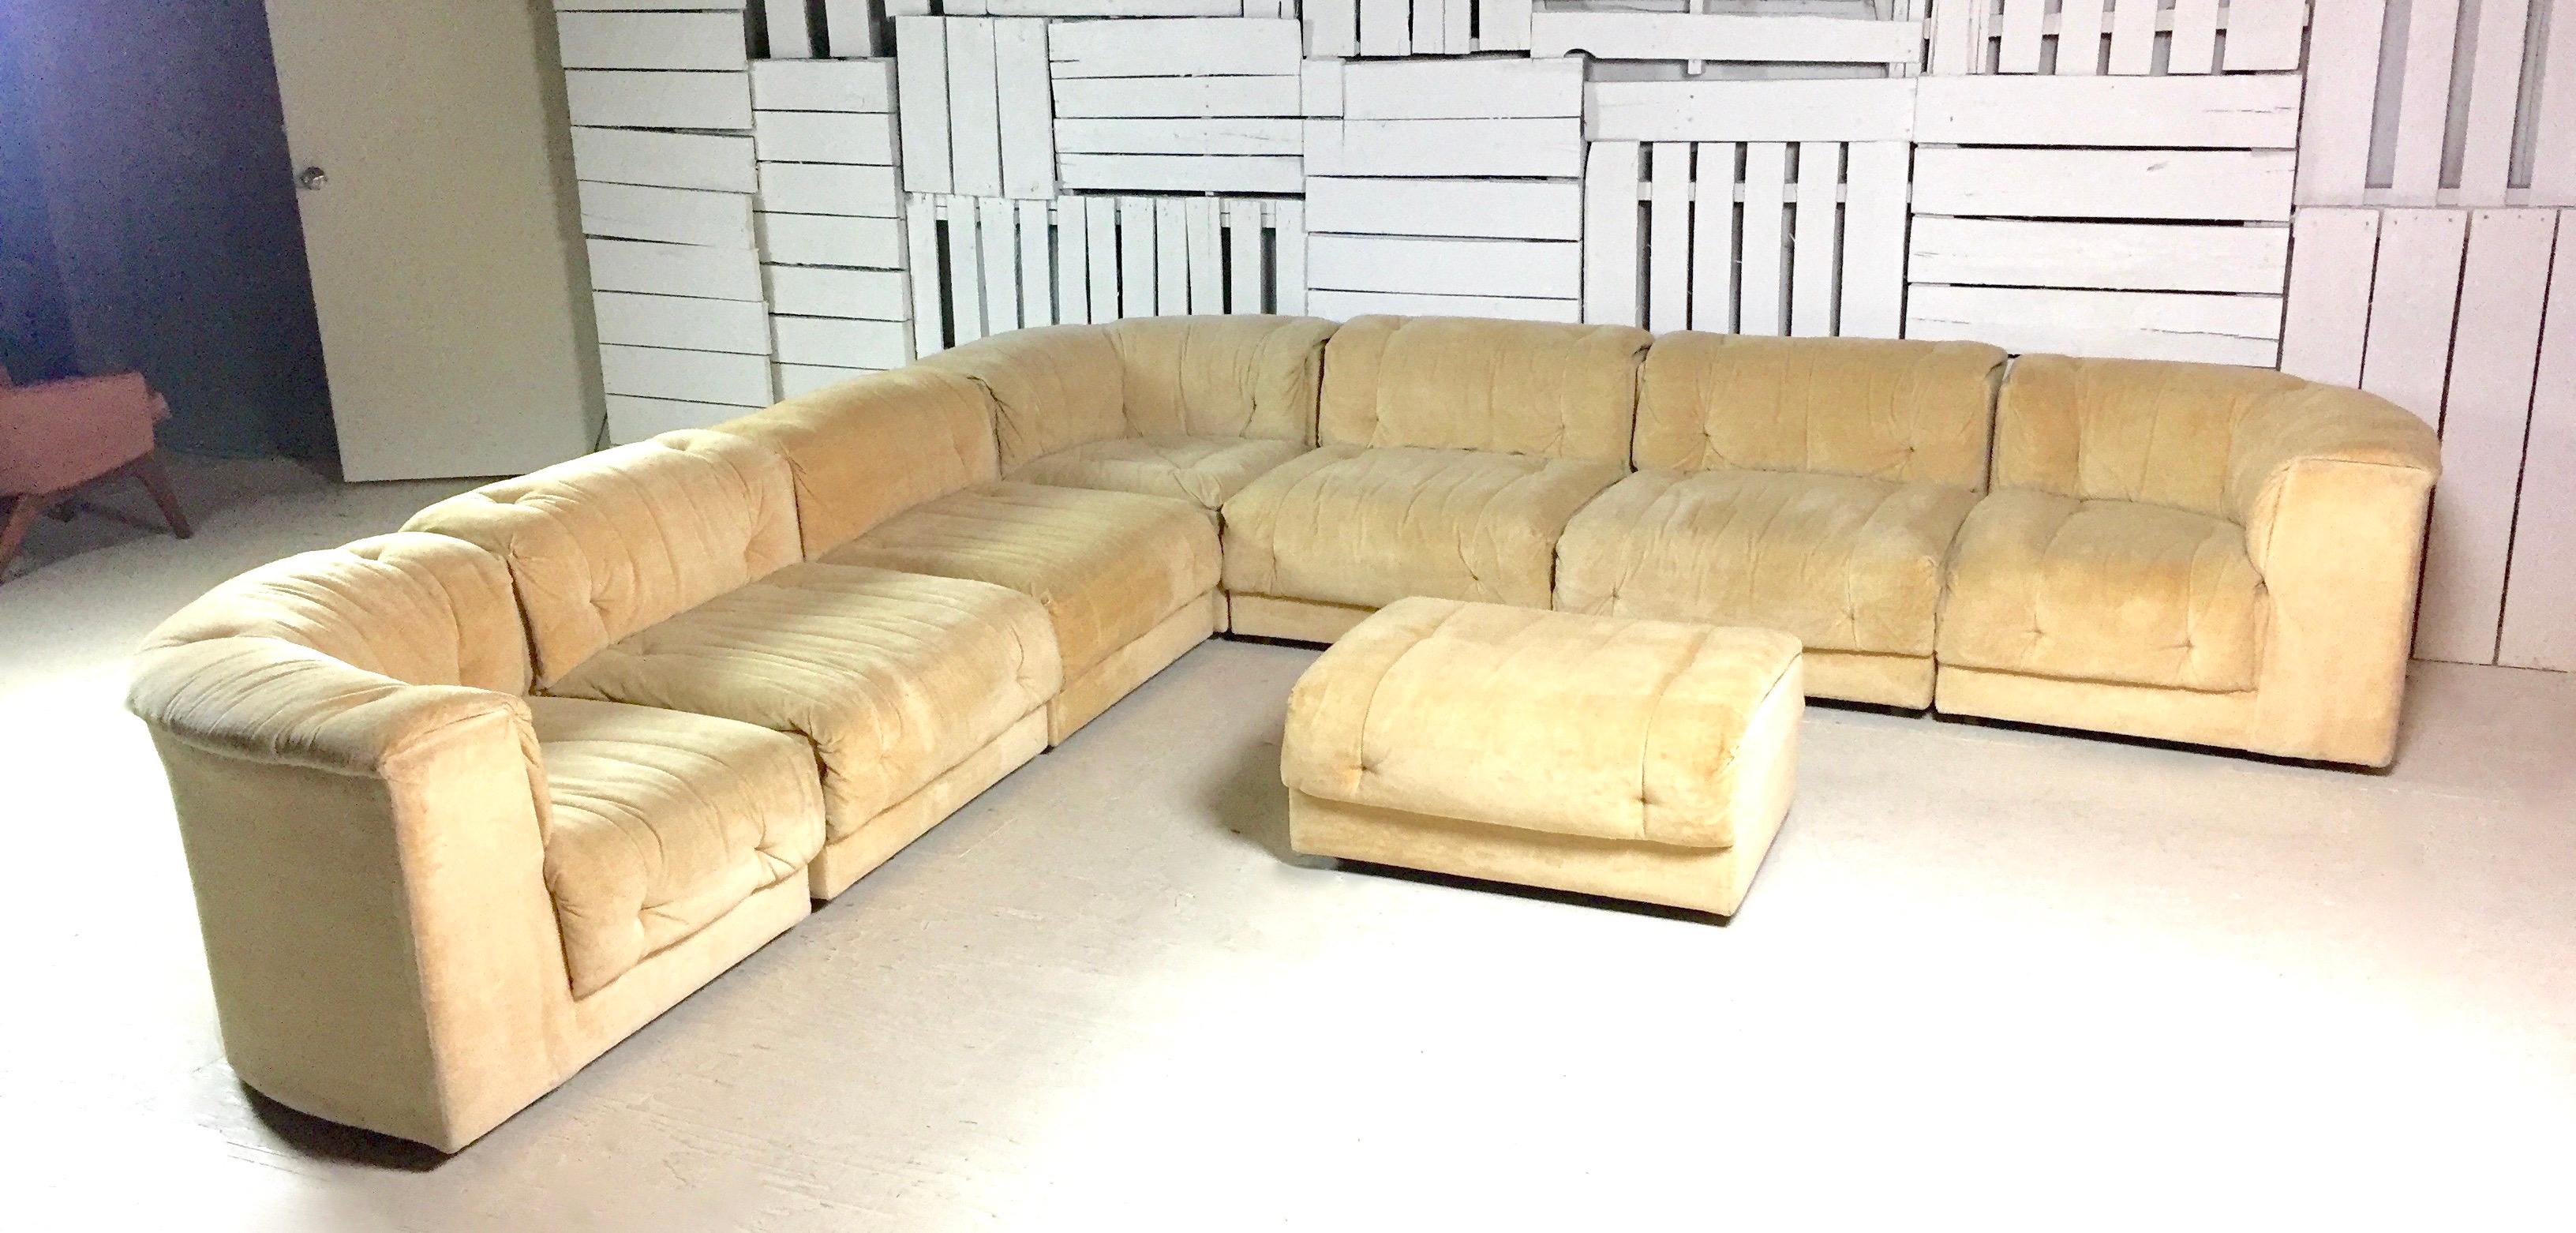 Authentic Adrian Pearsall sectionals are some of his most dramatic creations. They also need space! Please peruse our growing collection of rare Pearsall pieces which we will be listing this month.

Adrian Pearsall three-piece serpentine sectional